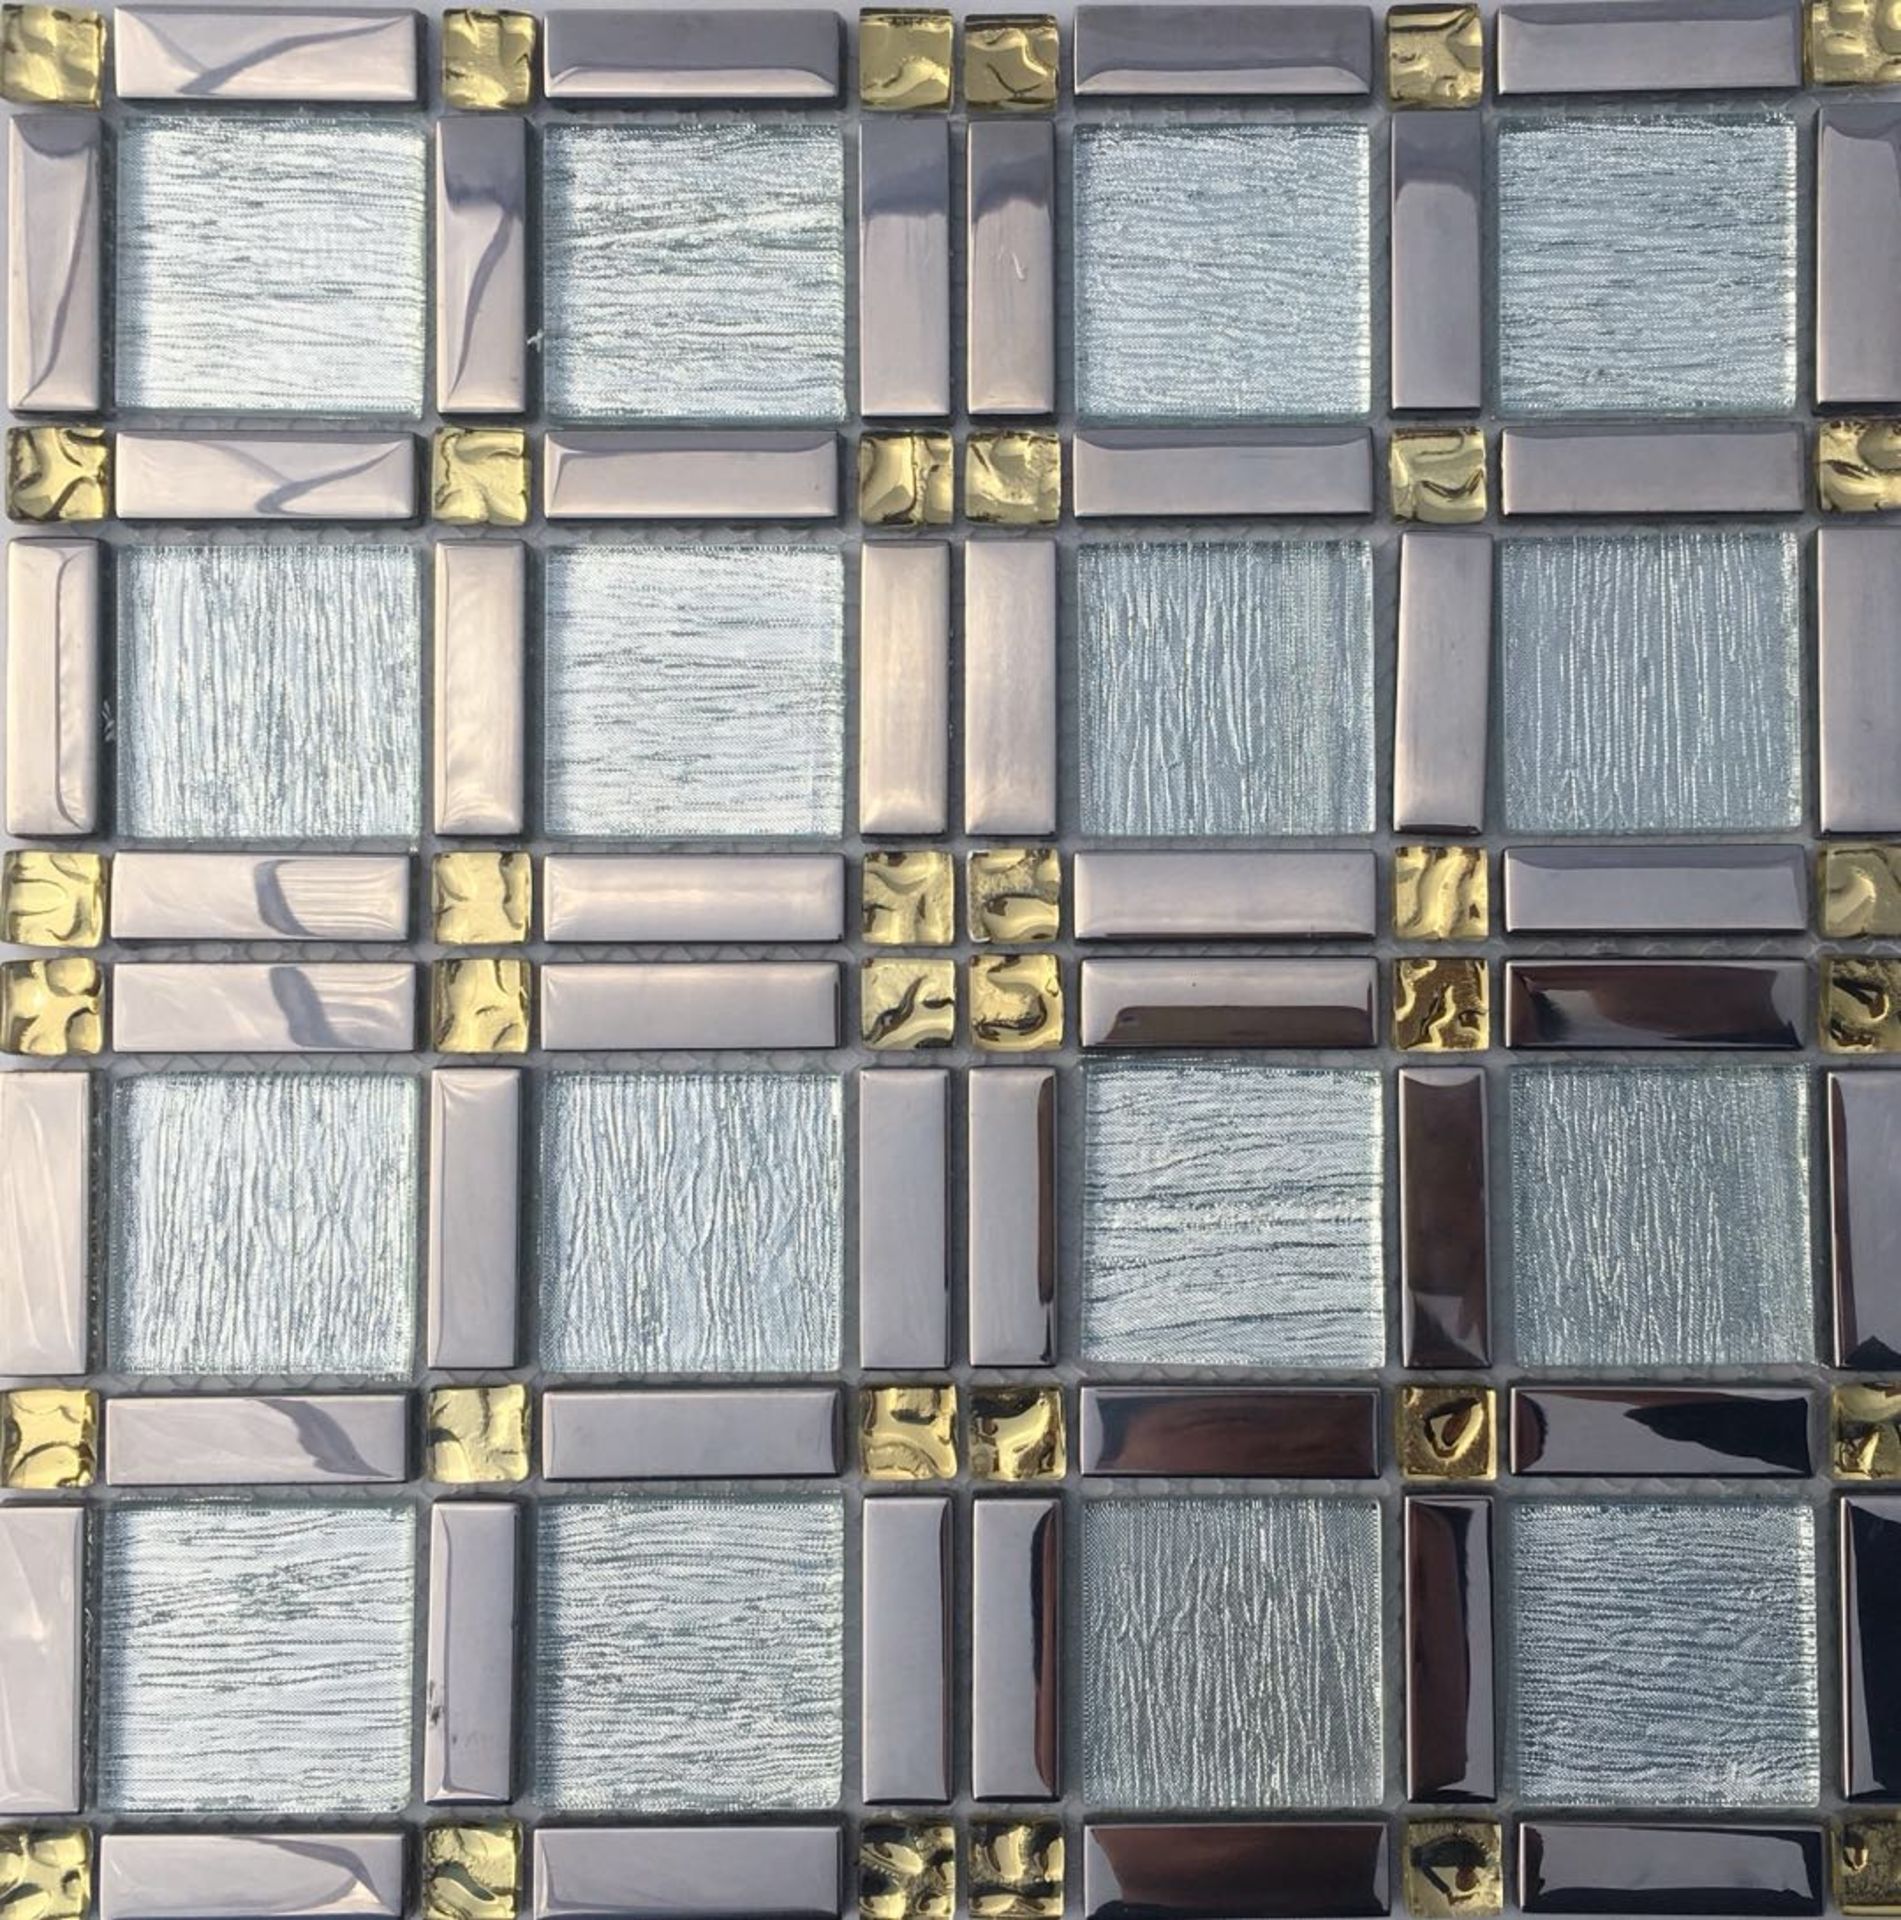 Stock Clearance High Quality Glass/Stainless Steel Mosaic Tiles - 11 Sheets - One Square Metre